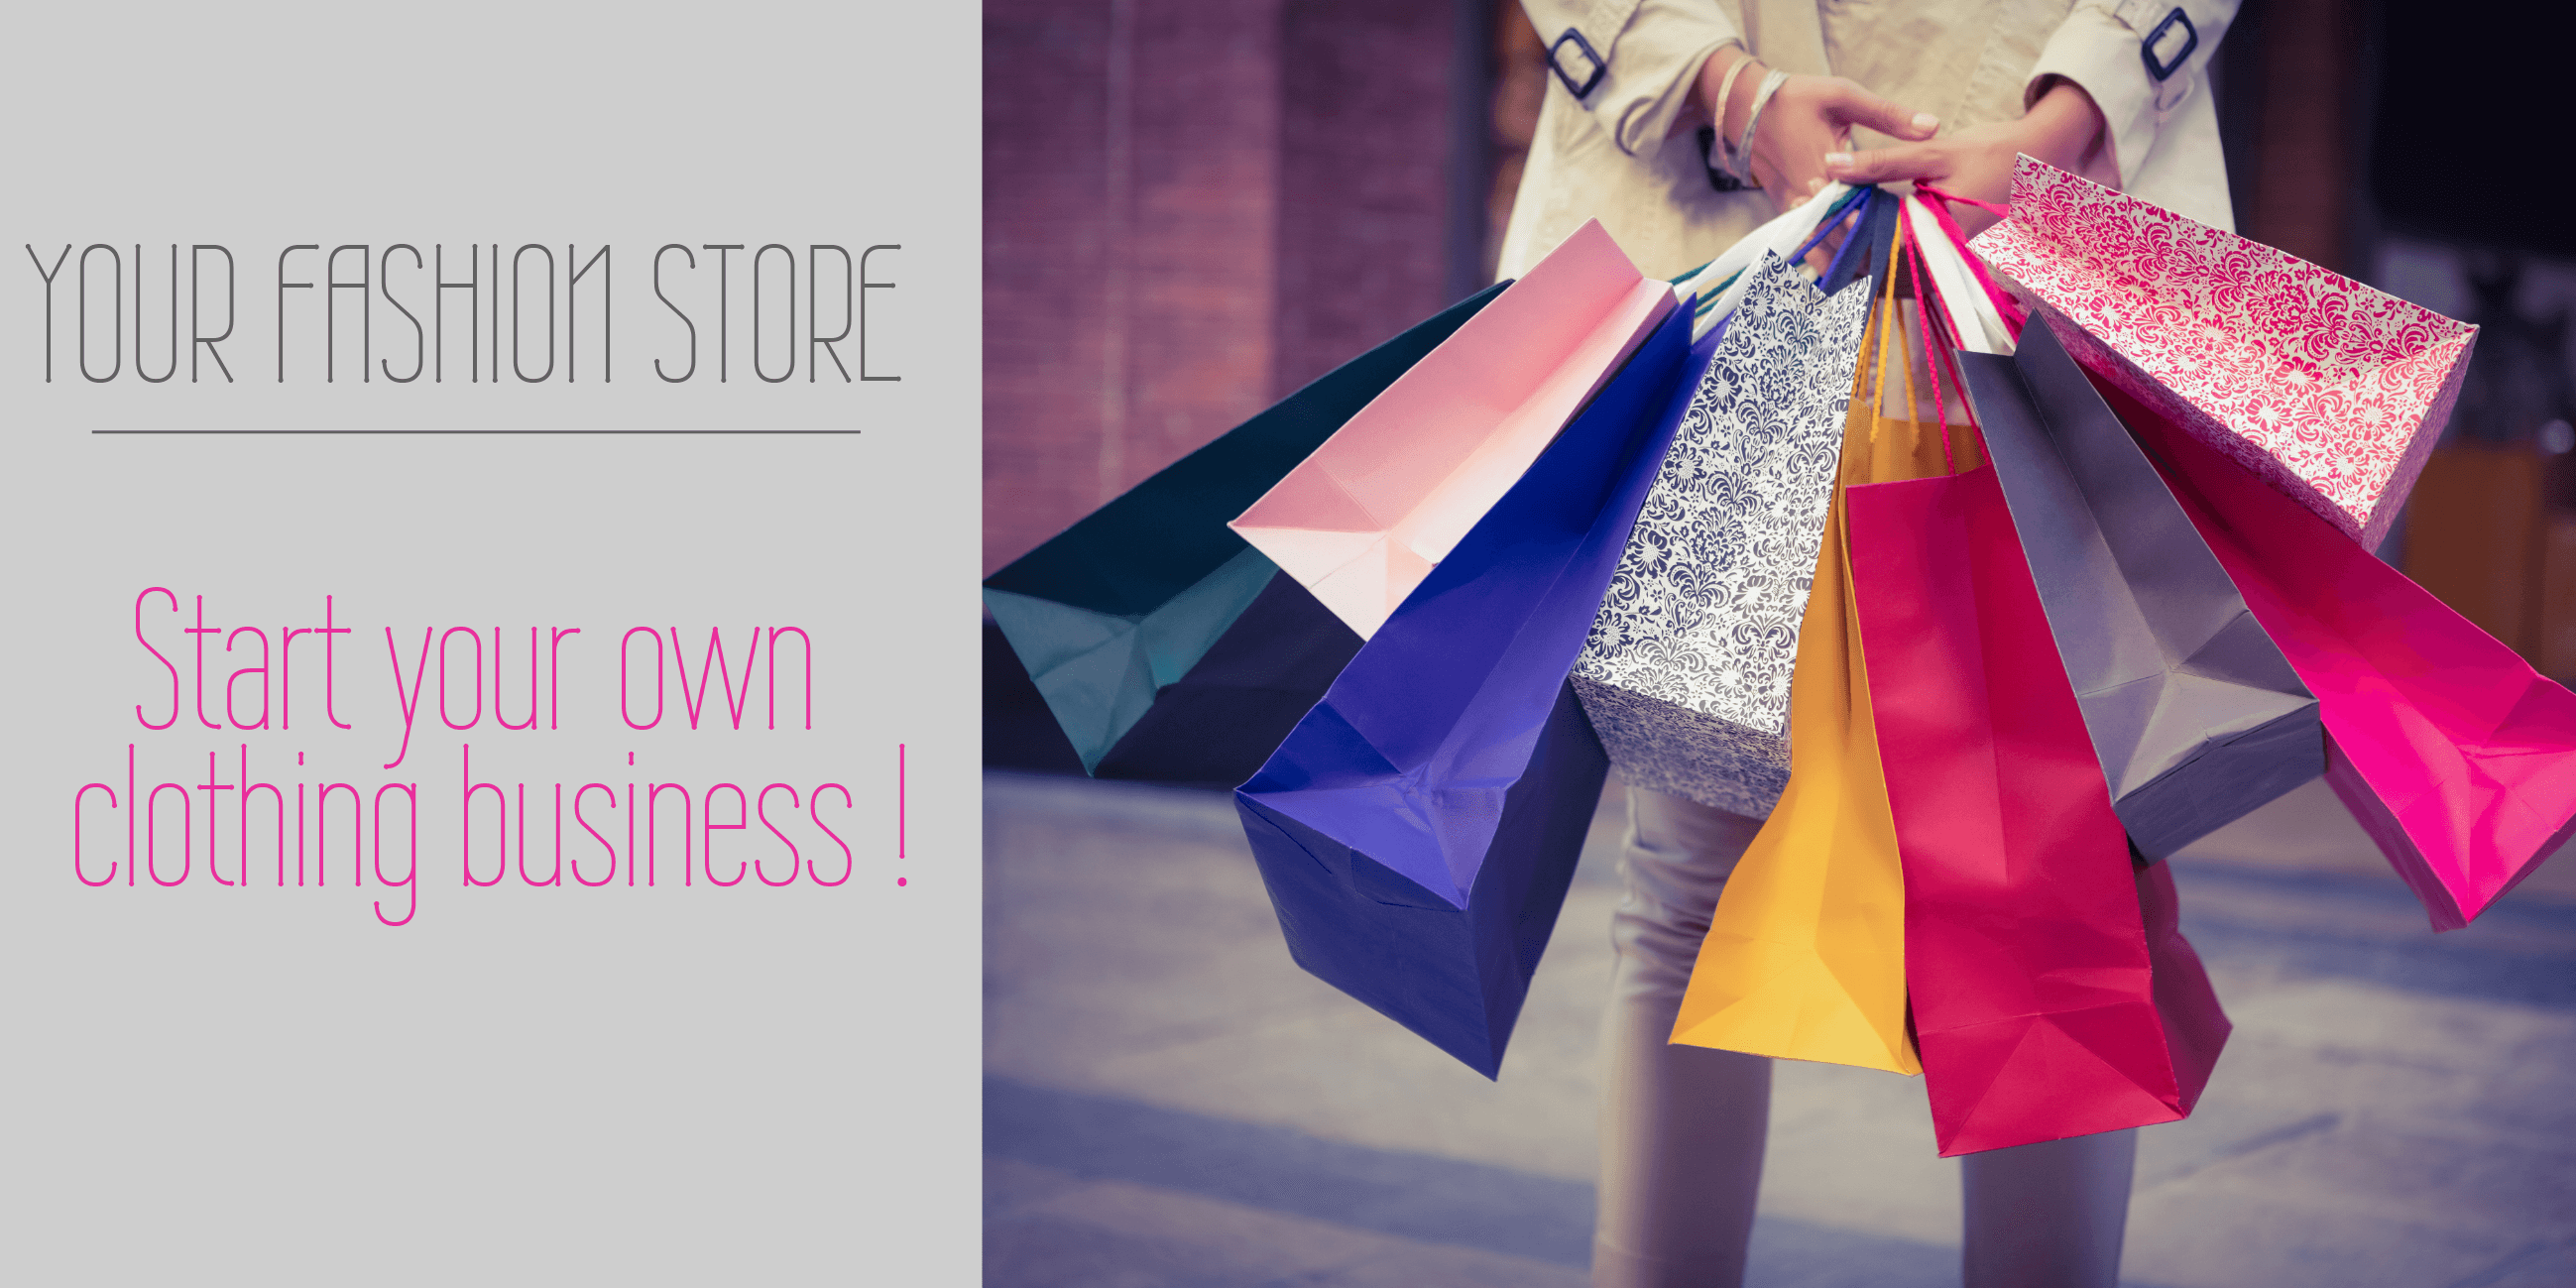 Text 'your fashion store start your own clothing business' with plenty of clothes bags - 2022’s Top 10 Passive Income Side Hustles: New Ideas to Boost Your Earnings - Image